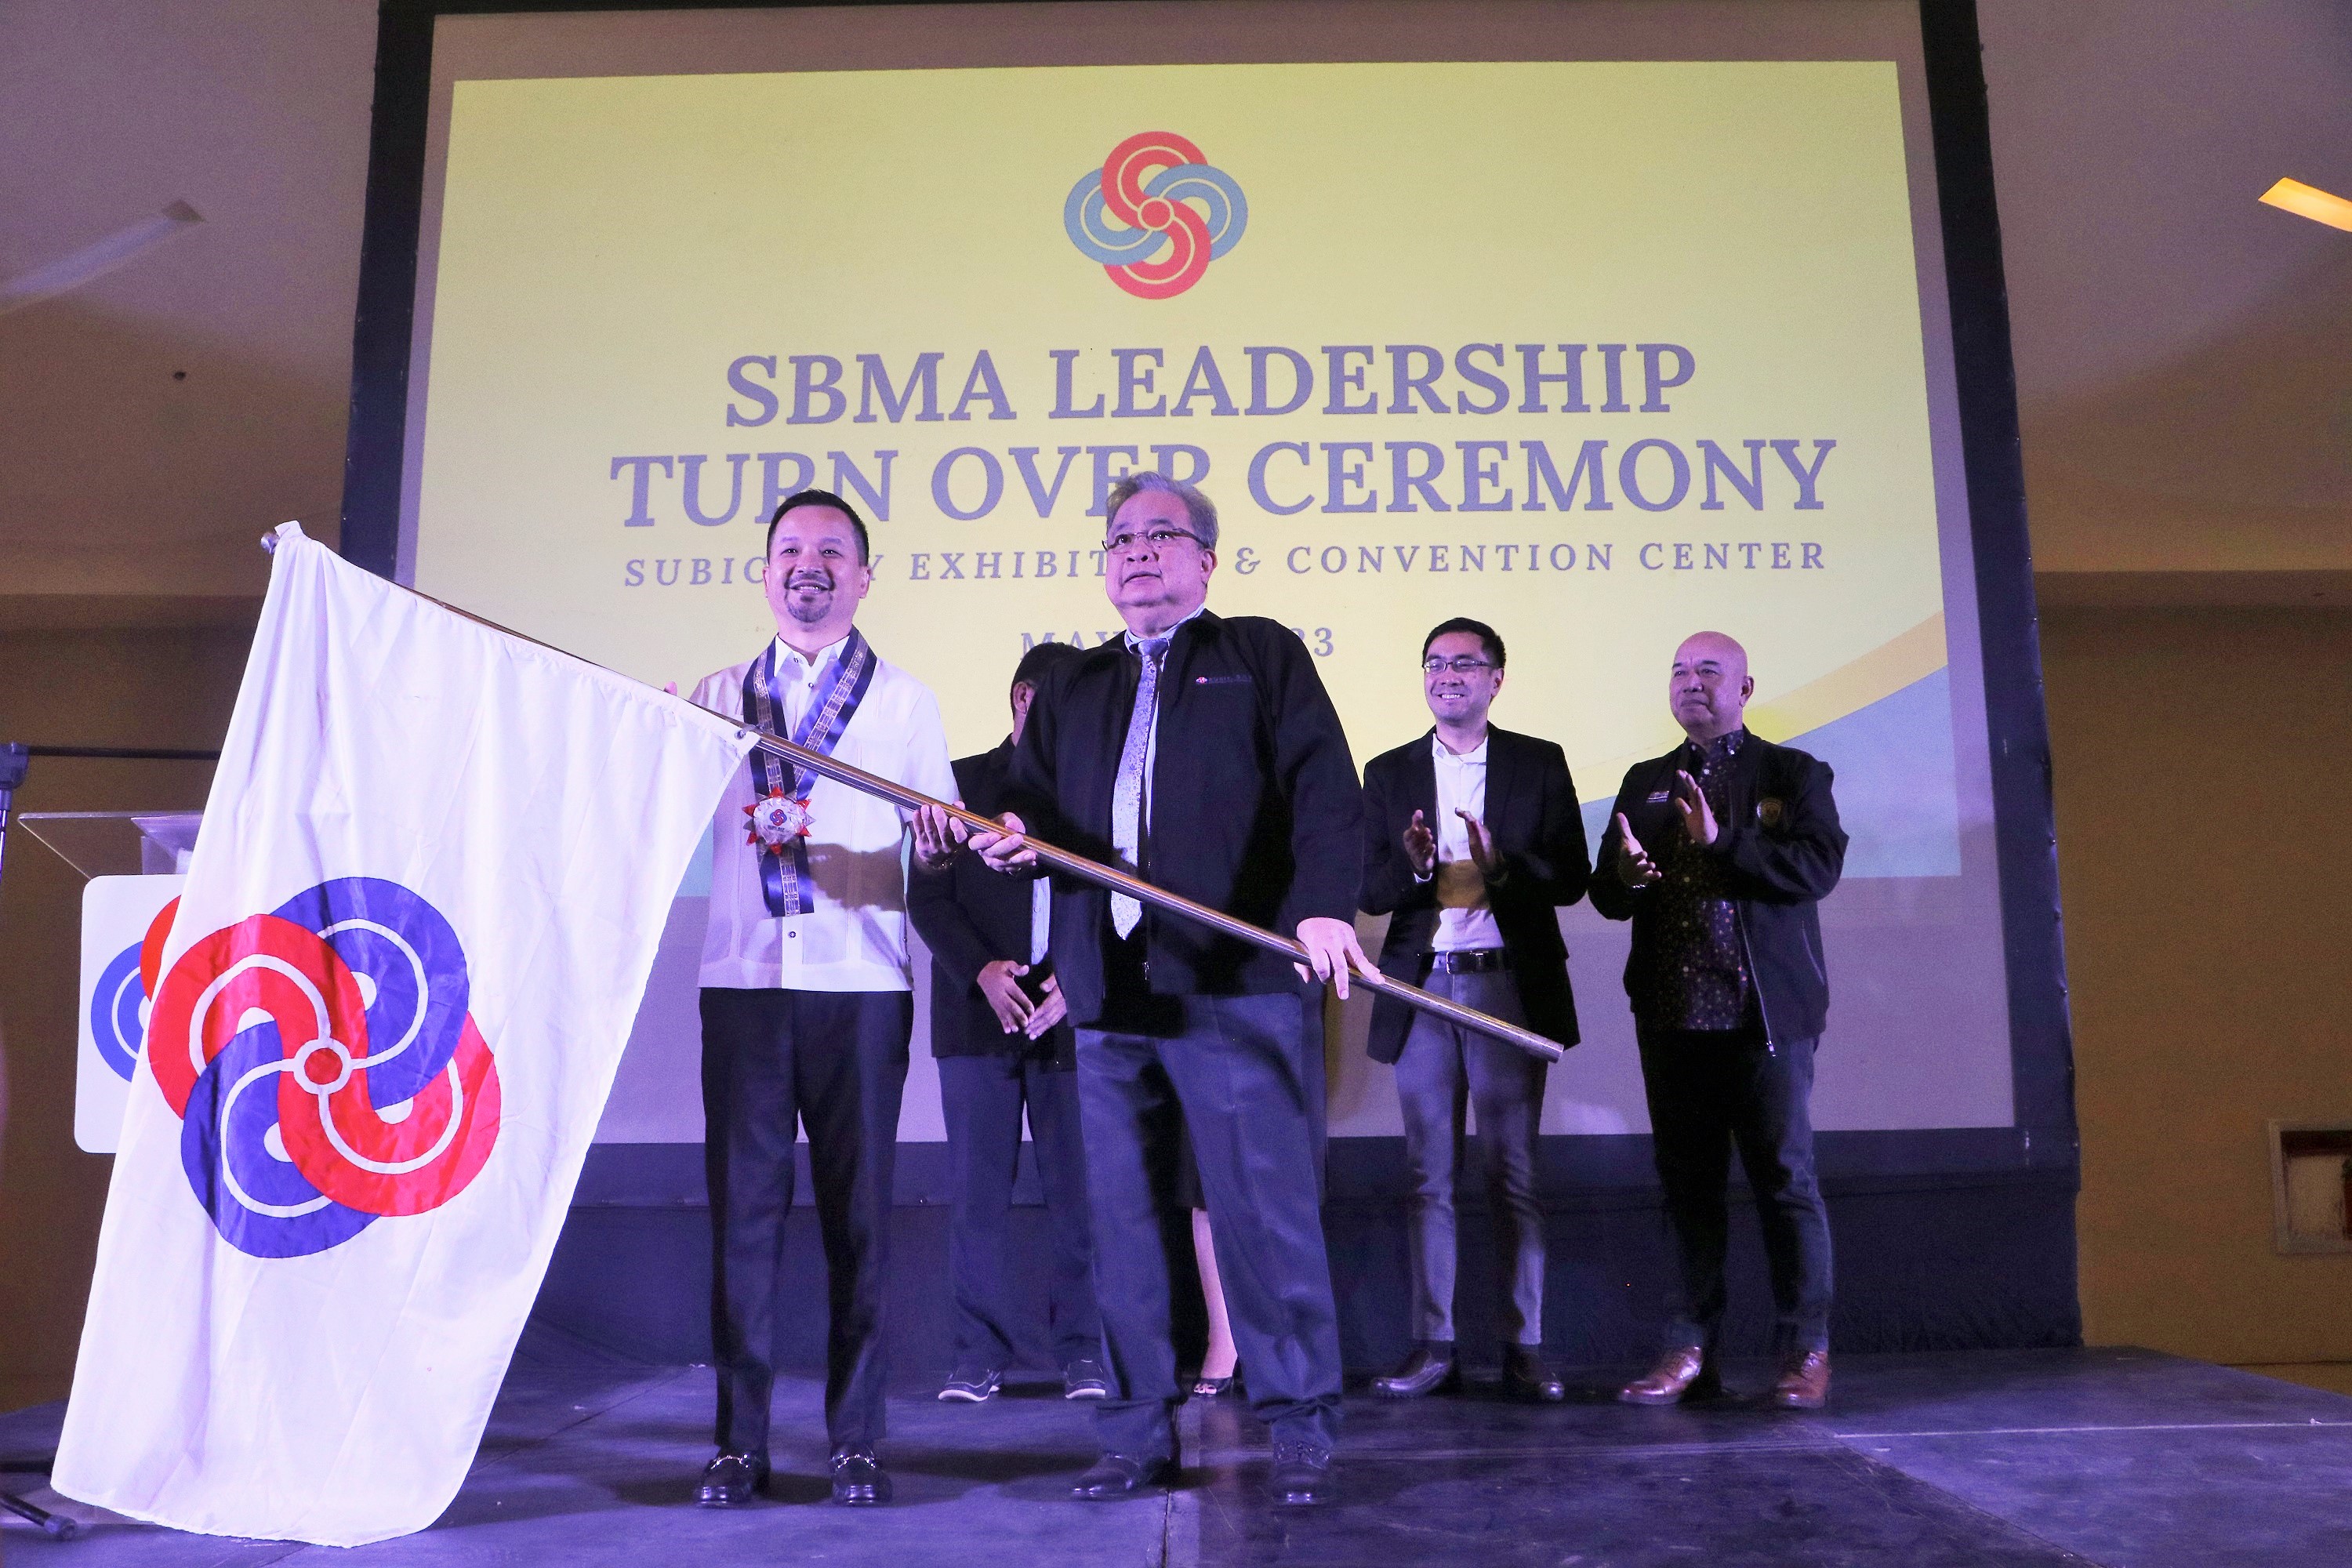 Newly appointed Subic Bay Metropolitan Authority (SBMA) Chairman &amp; Administrator Jonathan D. Tan symbolically receives the leadership of the agency from the Board of Directors headed by Atty. Tomas Lahom III, who hands over the agency flag during a modest turnover ceremony on Tuesday, May 16, 2023 at the Subic Bay Exhibition &amp; Convention Center (SBECC).